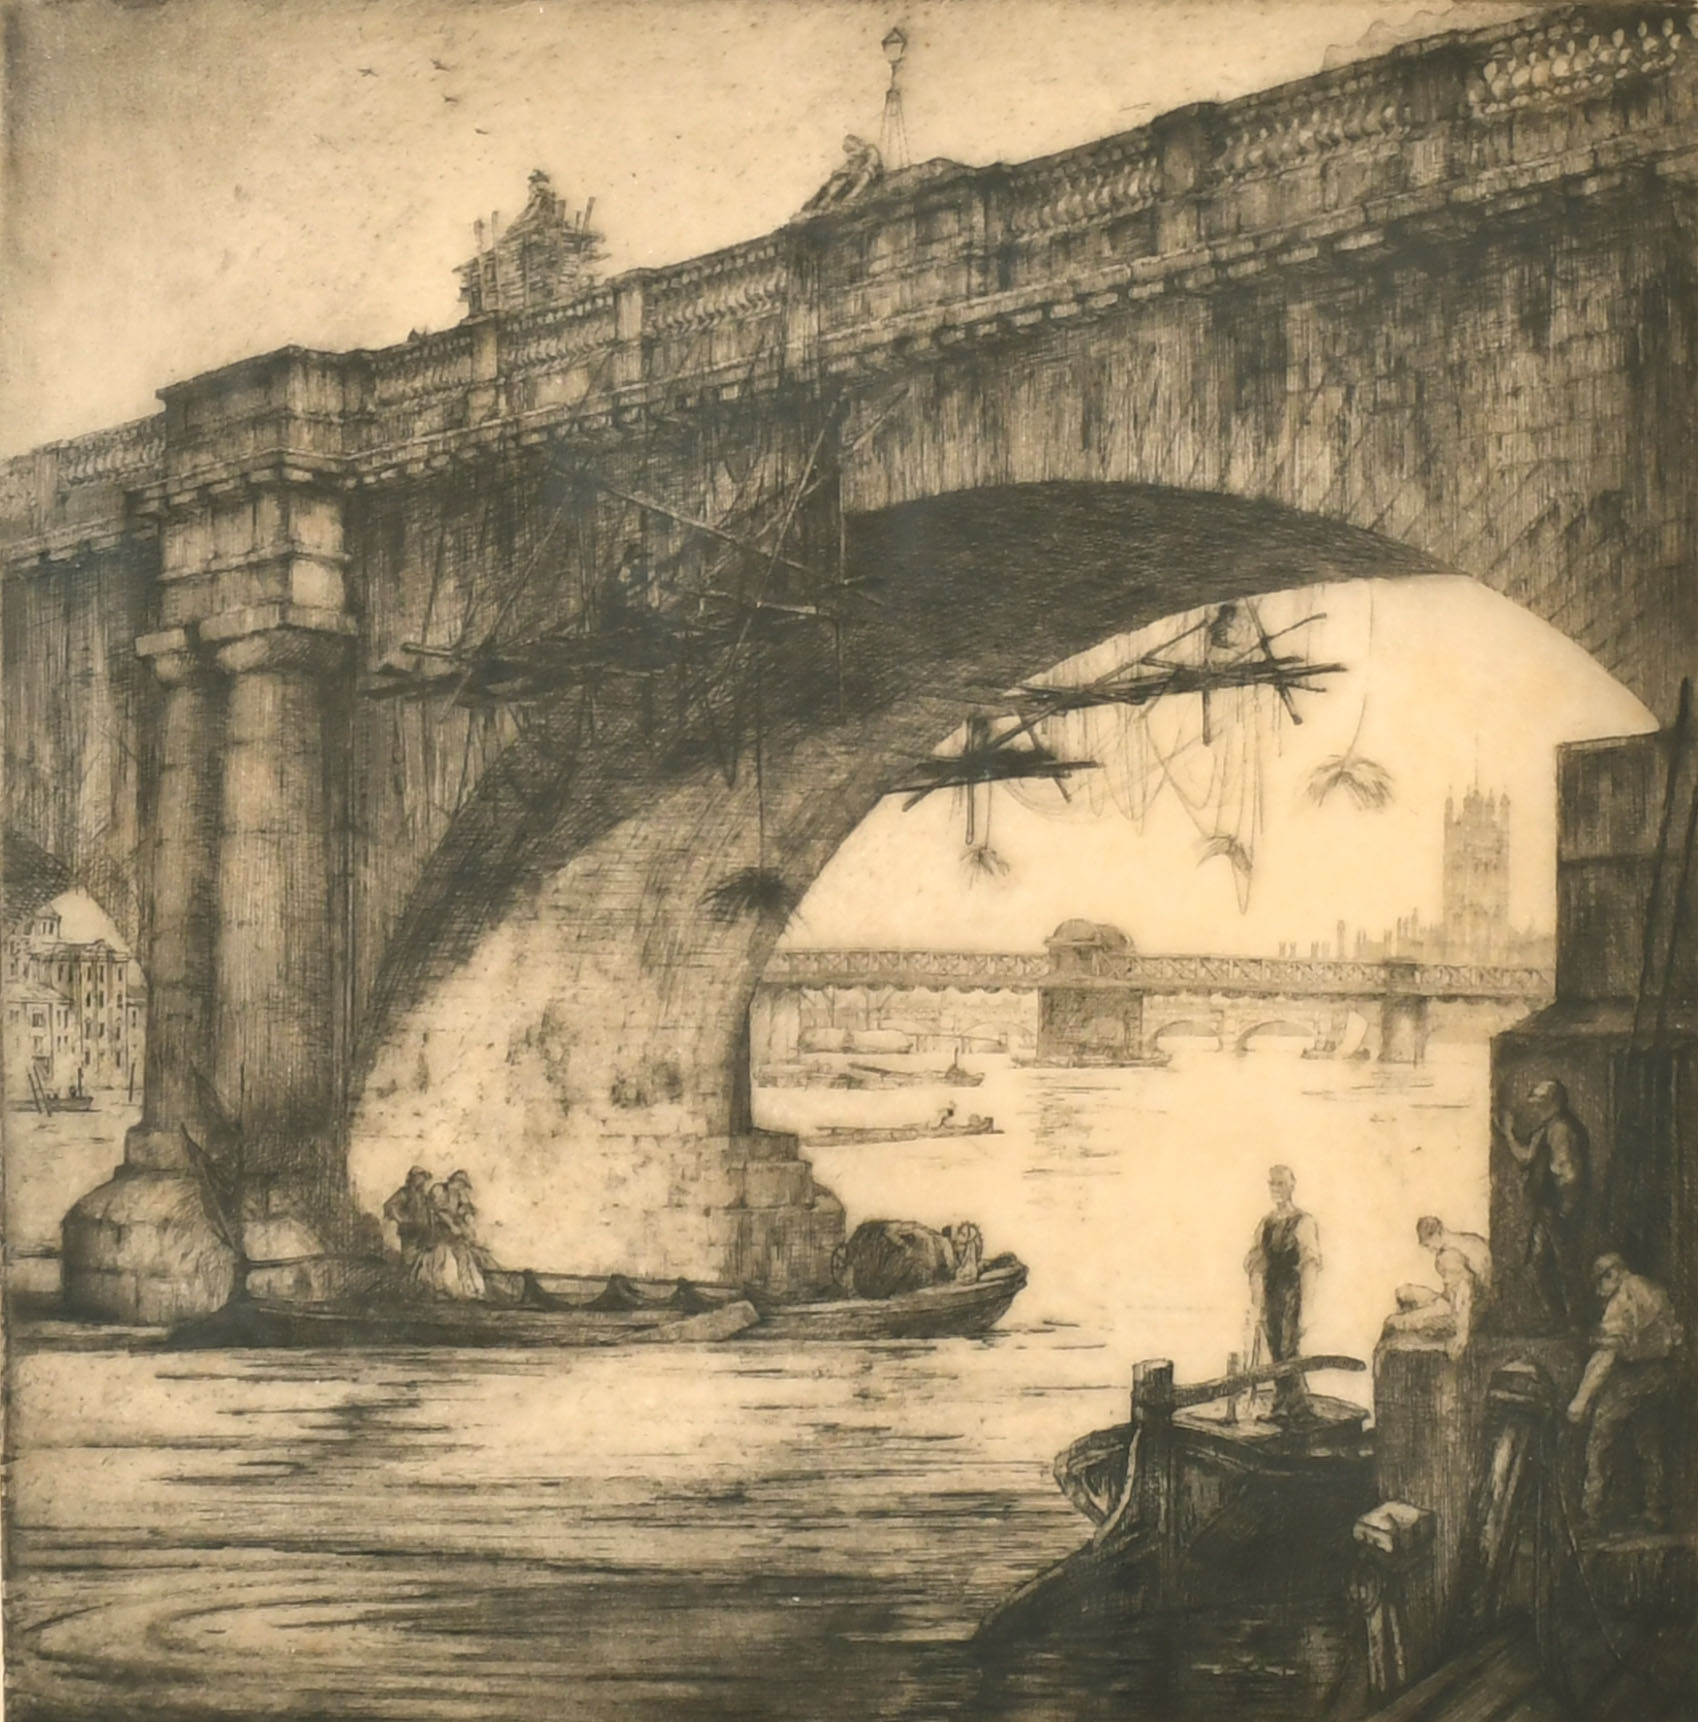 Nathaniel Sparks (1880-1957) British. "Waterloo Bridge", Etching, Signed in pencil, 11" x 11" (27.